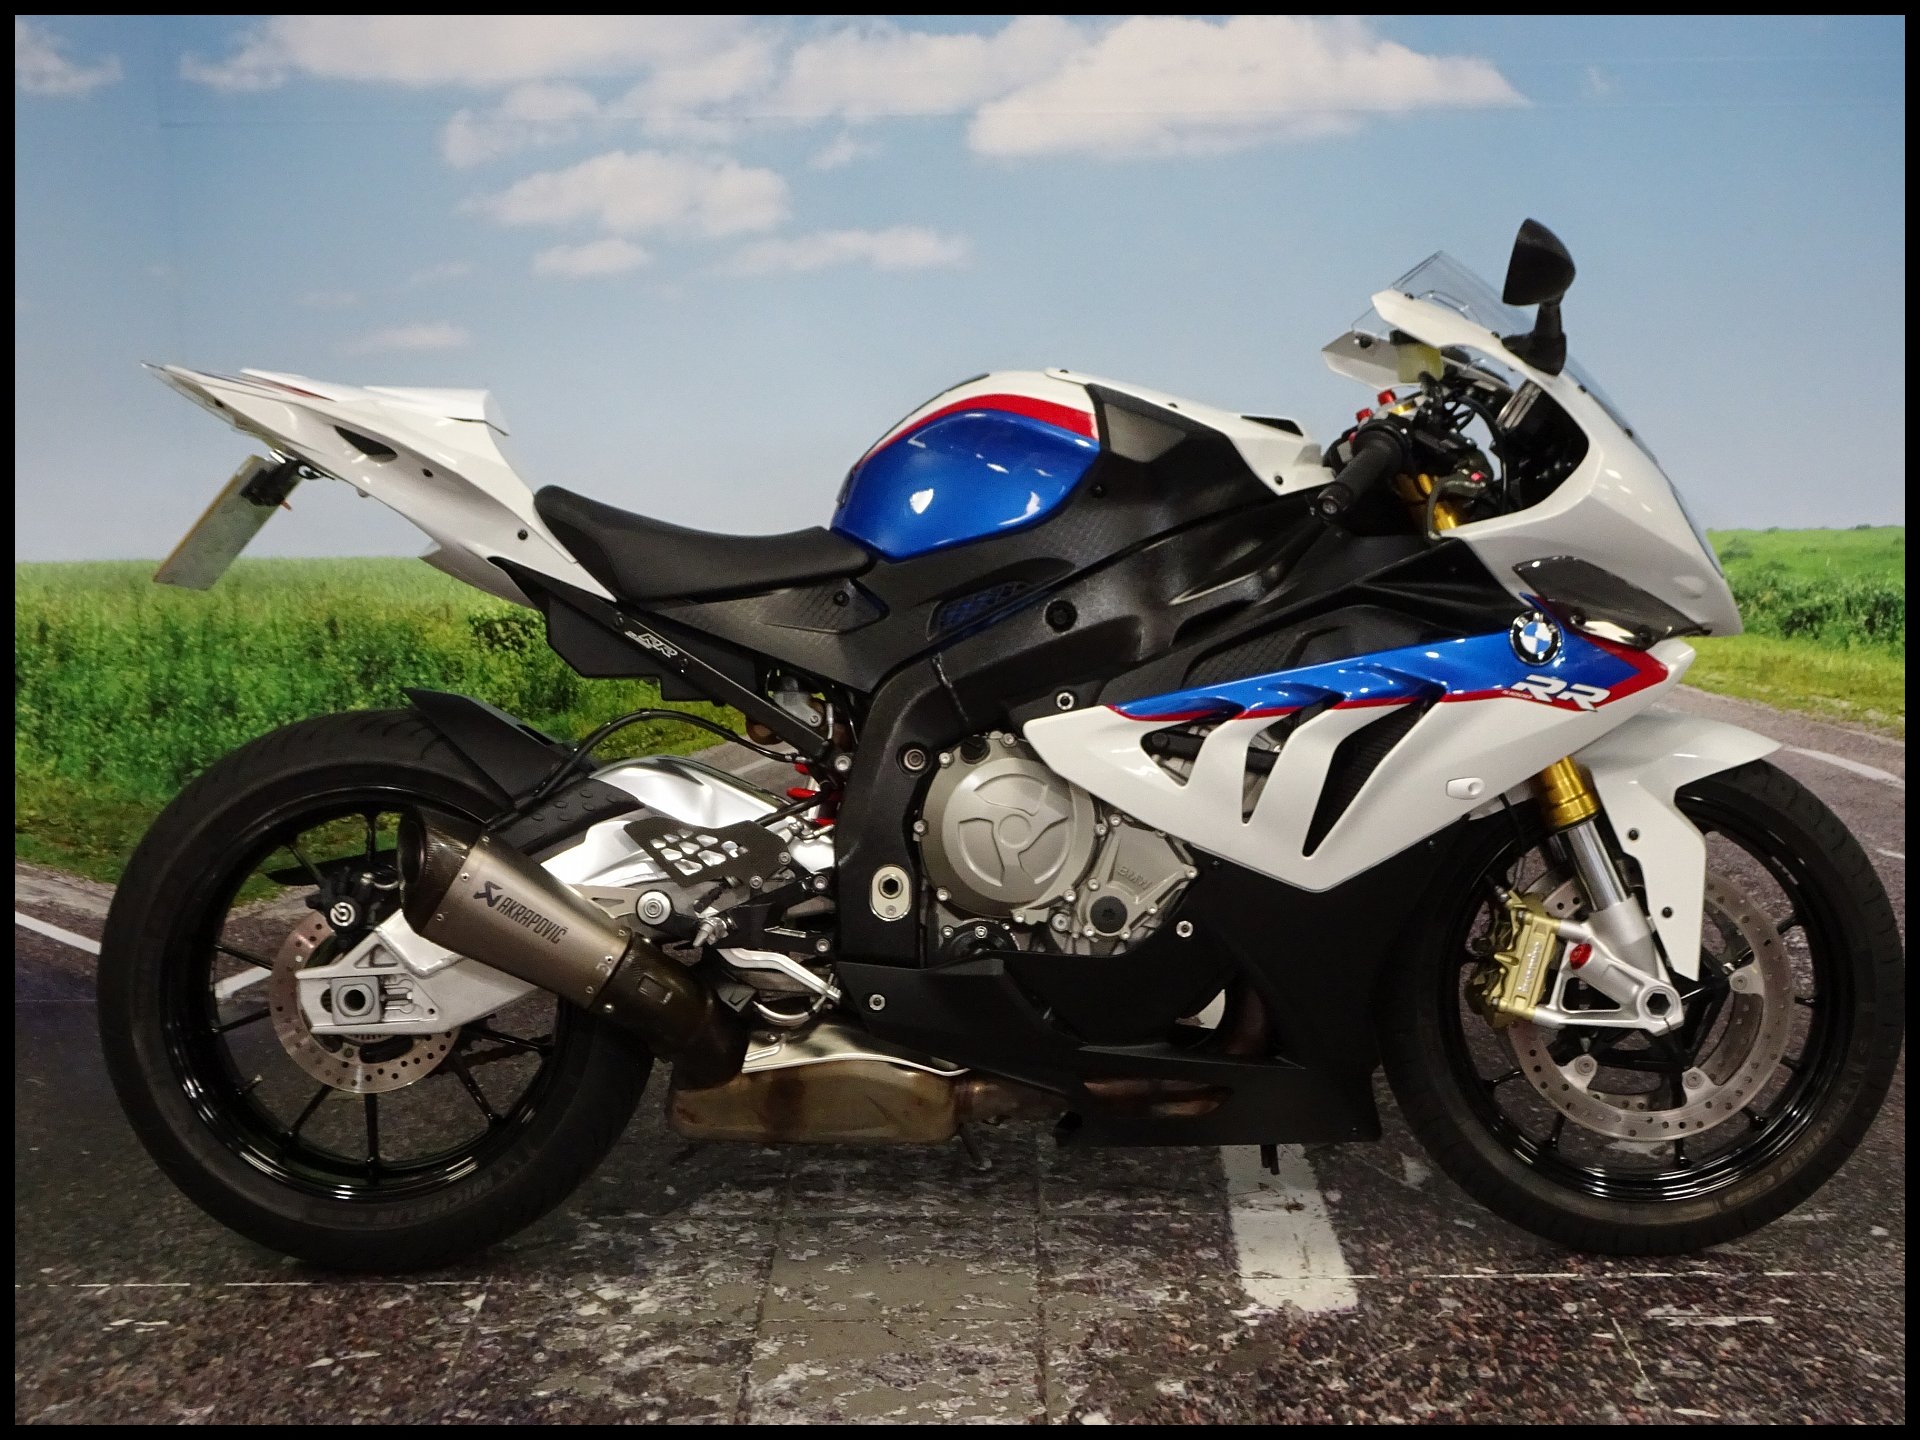 BMW S1000RR for sale Finance available and part exchange wel e CMC Motorcycles